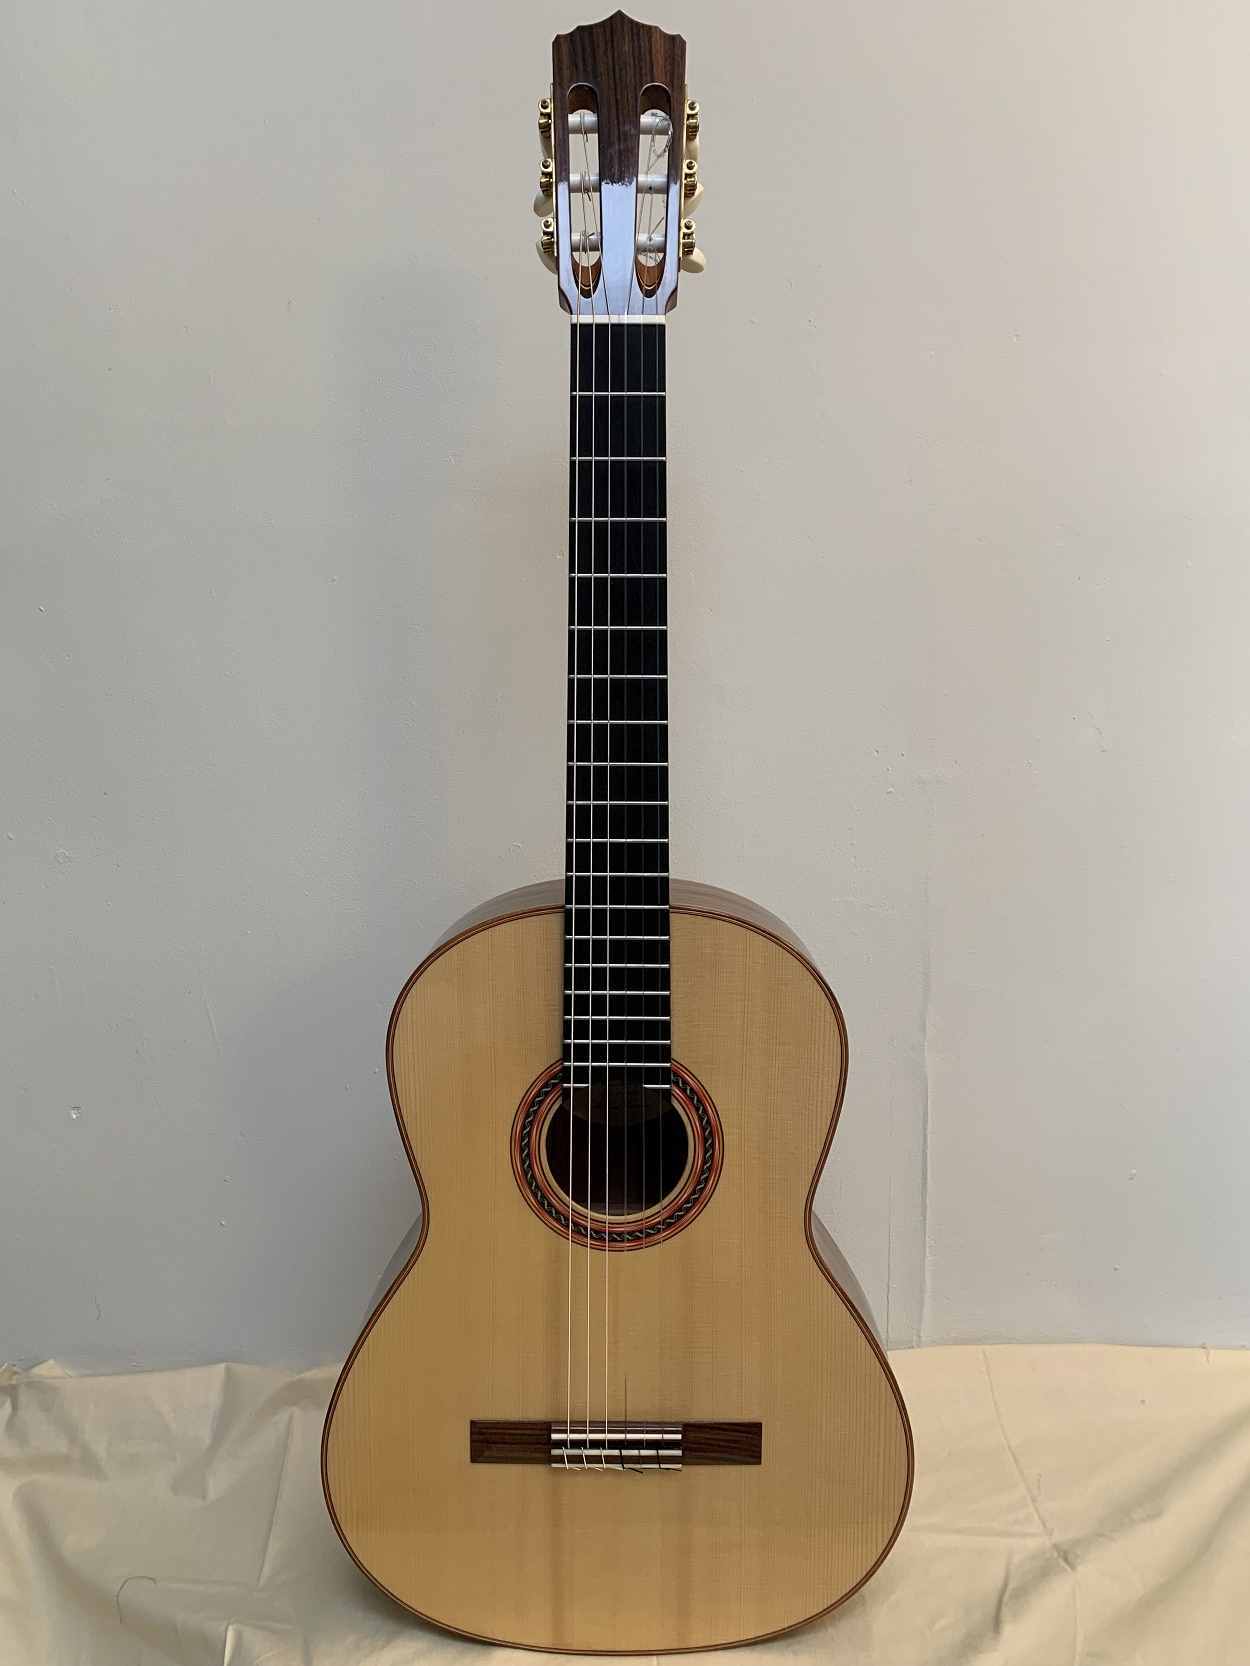 A Rios Nebro Concert Classical Guitar Hauser style Spruce top Ovankol back and sides